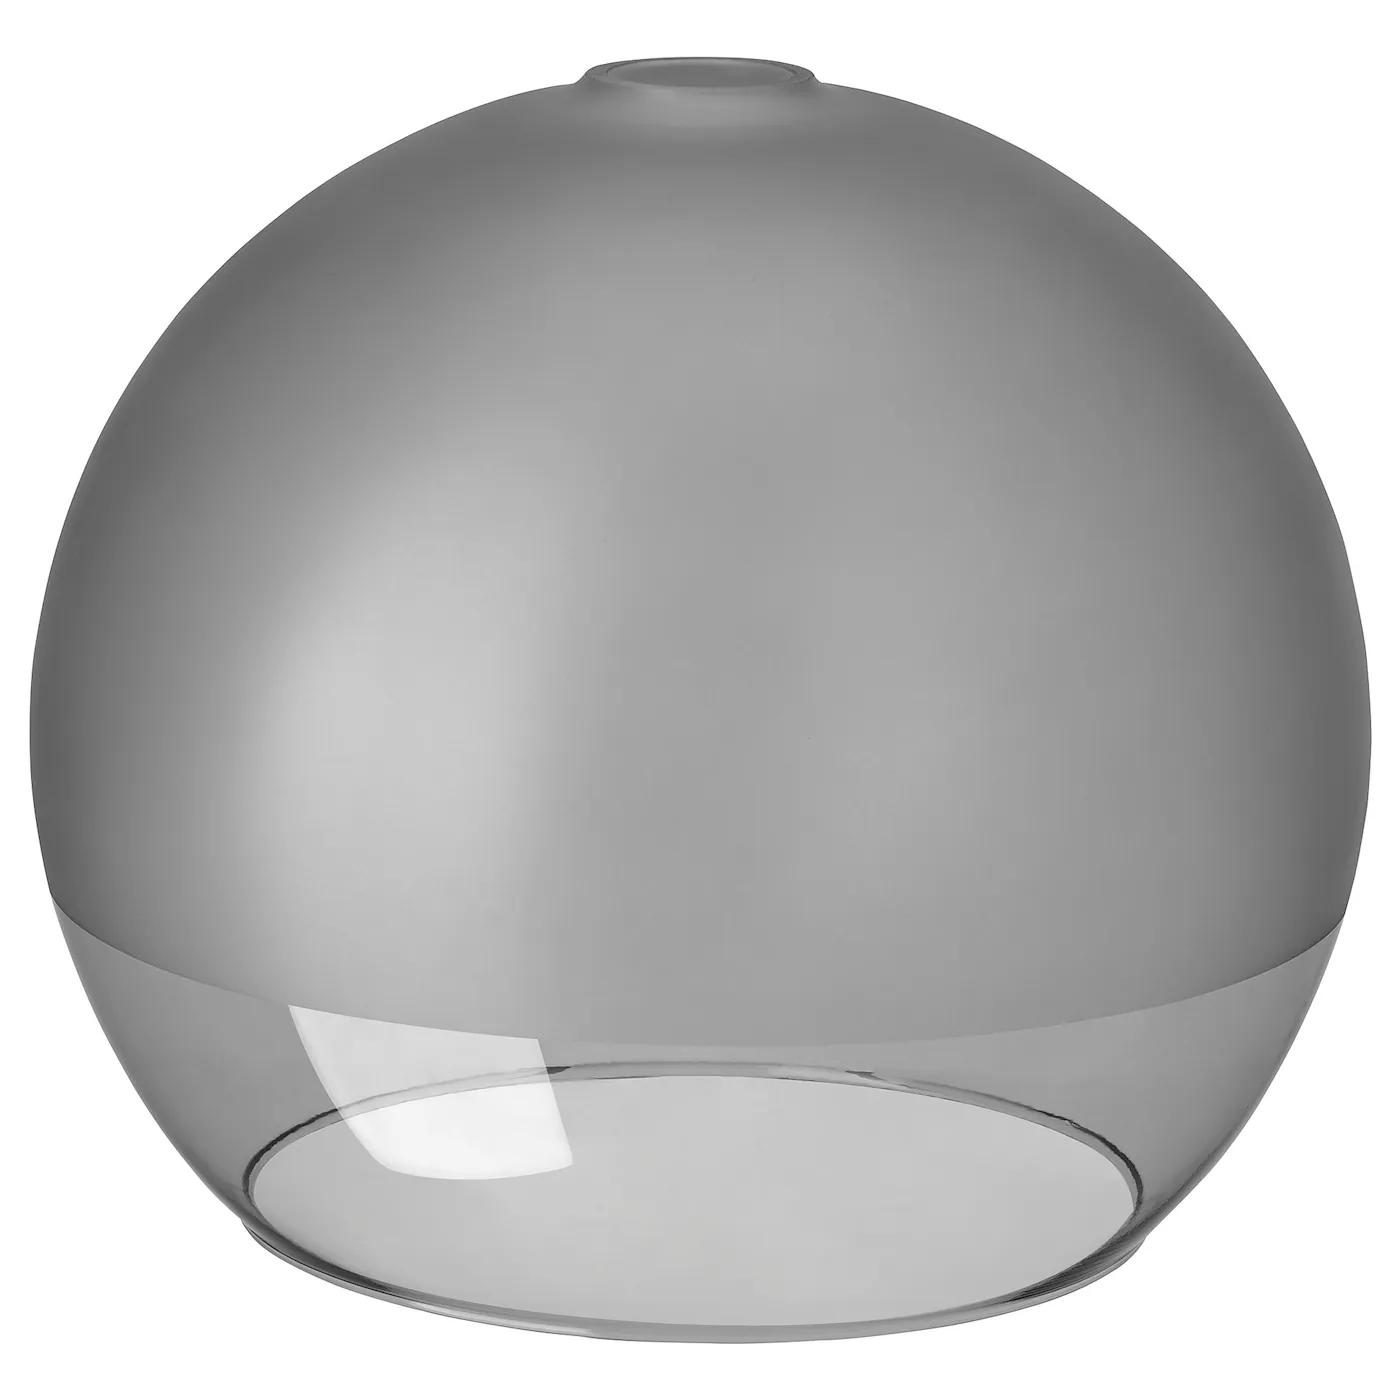 smoked glass lamp shade - Are glass lampshades good